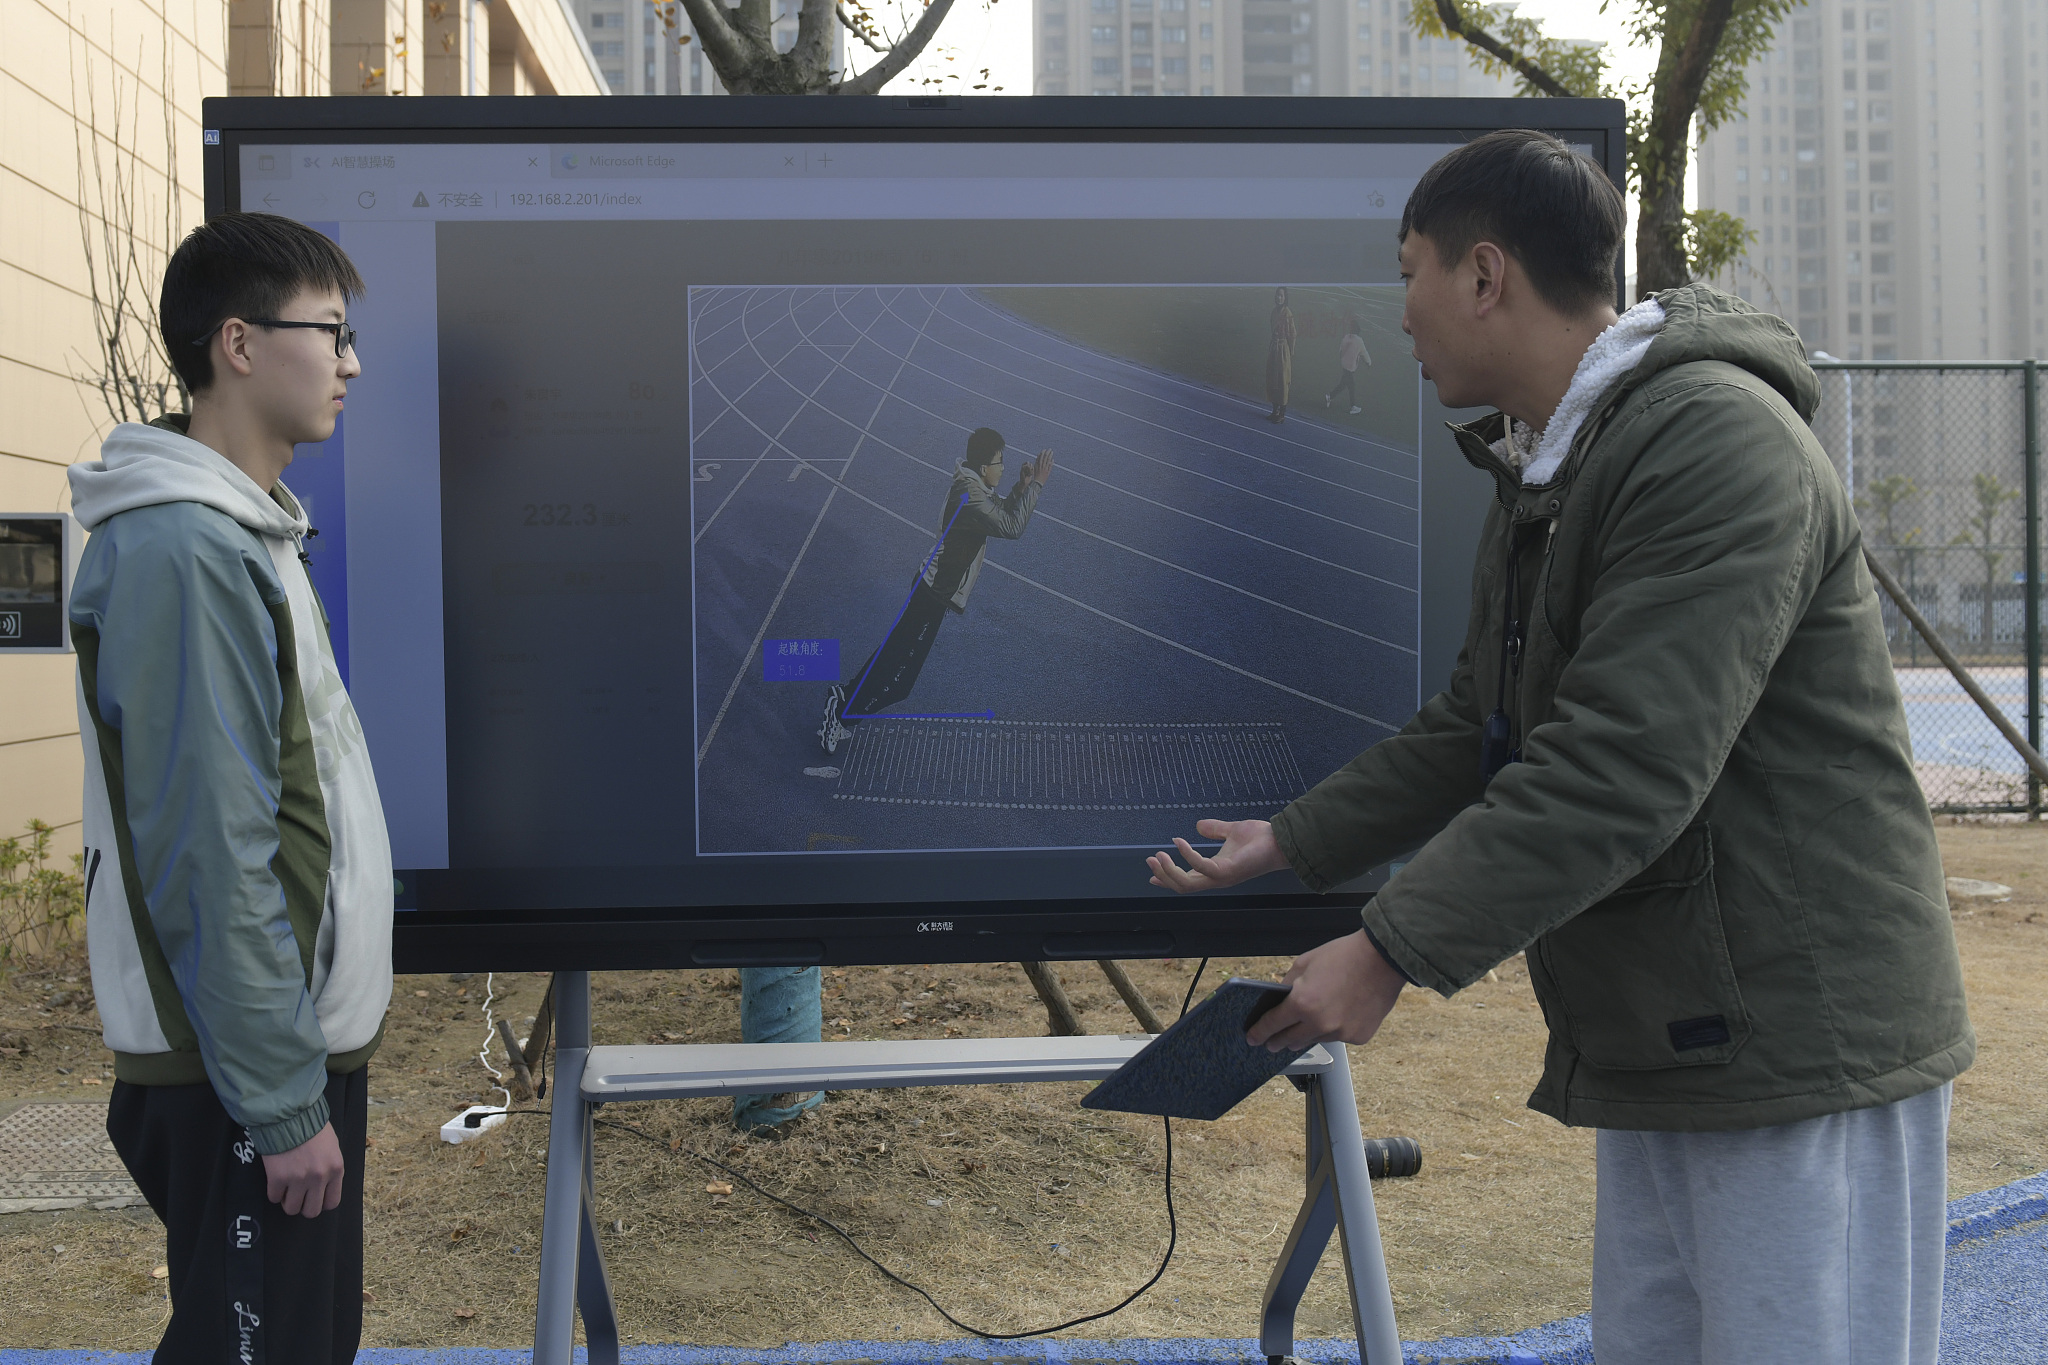 A physical education teacher at a middle school uses a smart playground system to provide feedback and analysis to students following their long jump exercises, Hefei, east China's Anhui Province, January 12, 2022. /CFP